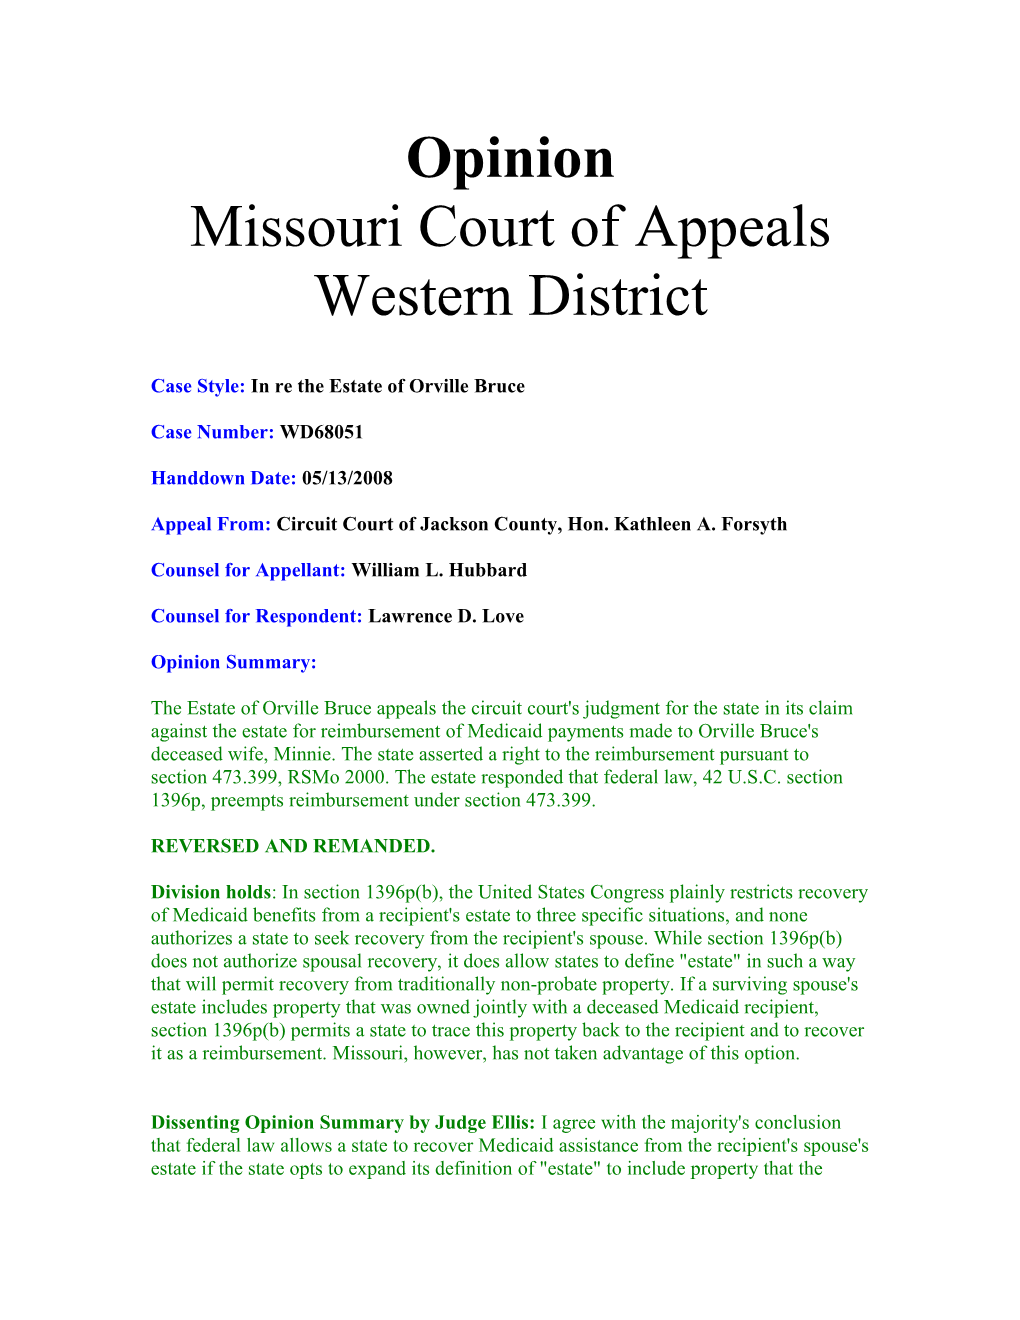 Opinion Missouri Court of Appeals Western District